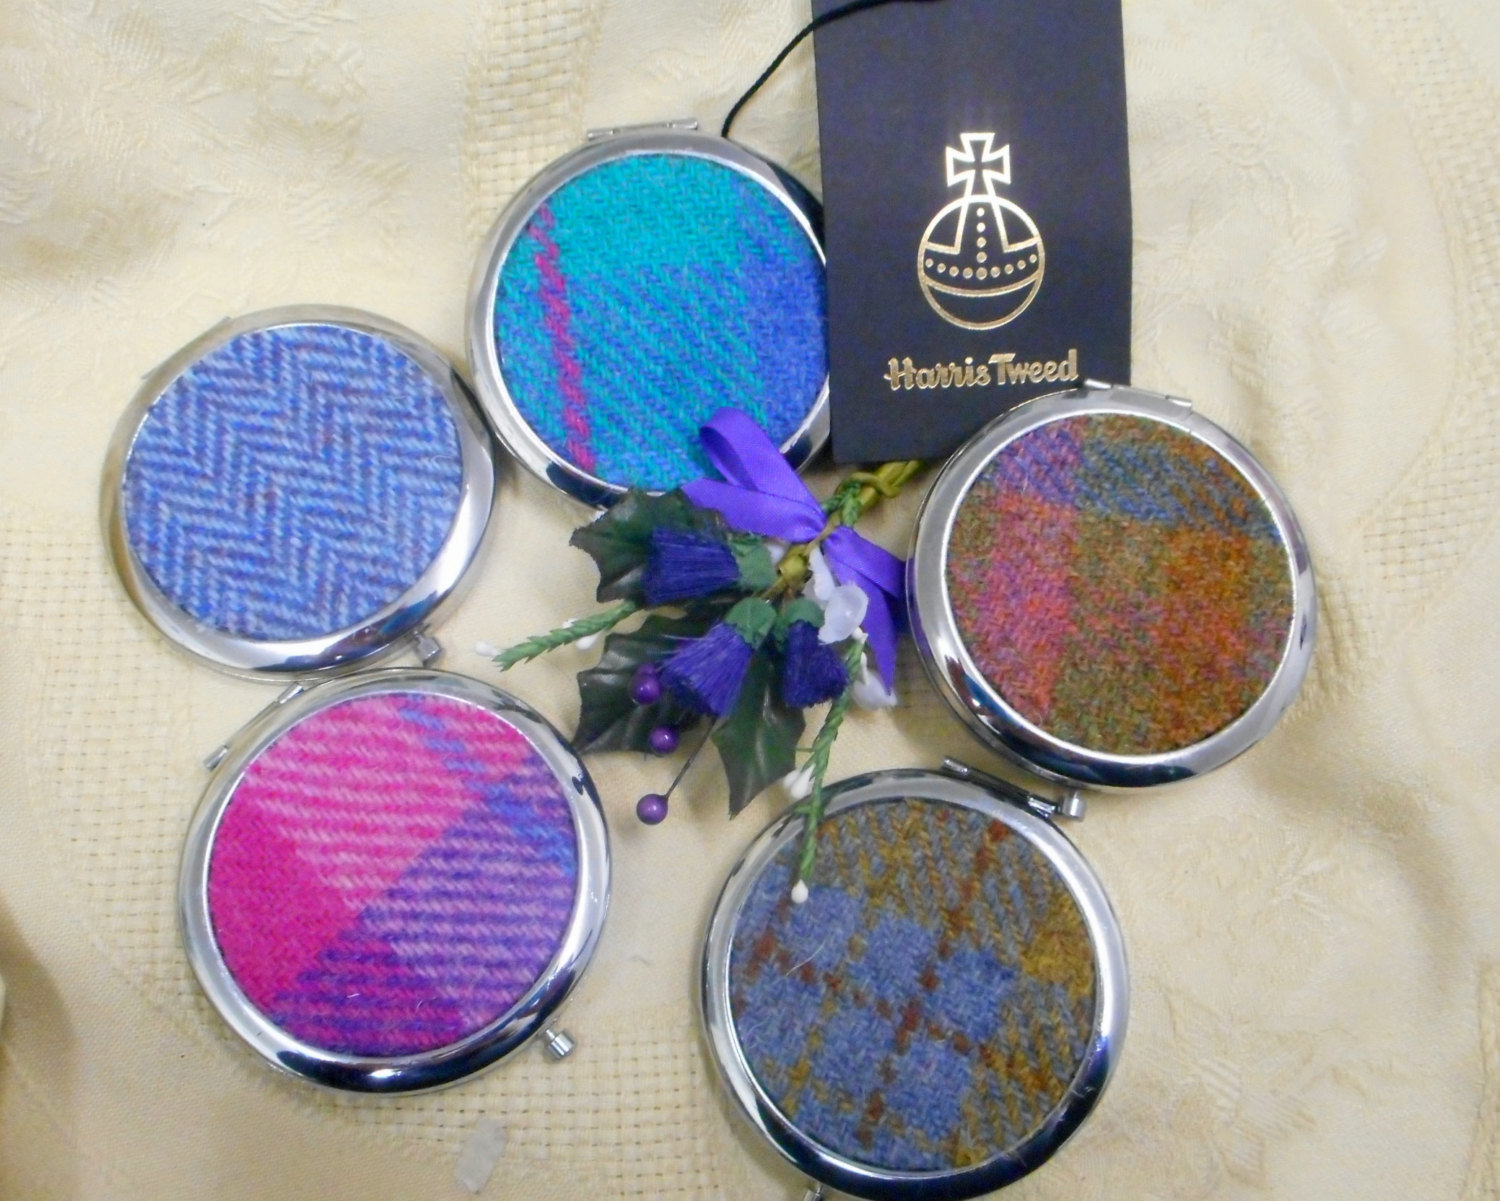 Purple blue Pink Compact Mirror  Kaona Harris Tweed,  Scottish gift for mother, sister,best friend or teacher ,handbag or pocket accessory,  made in Scotland by Tweed with a Twist